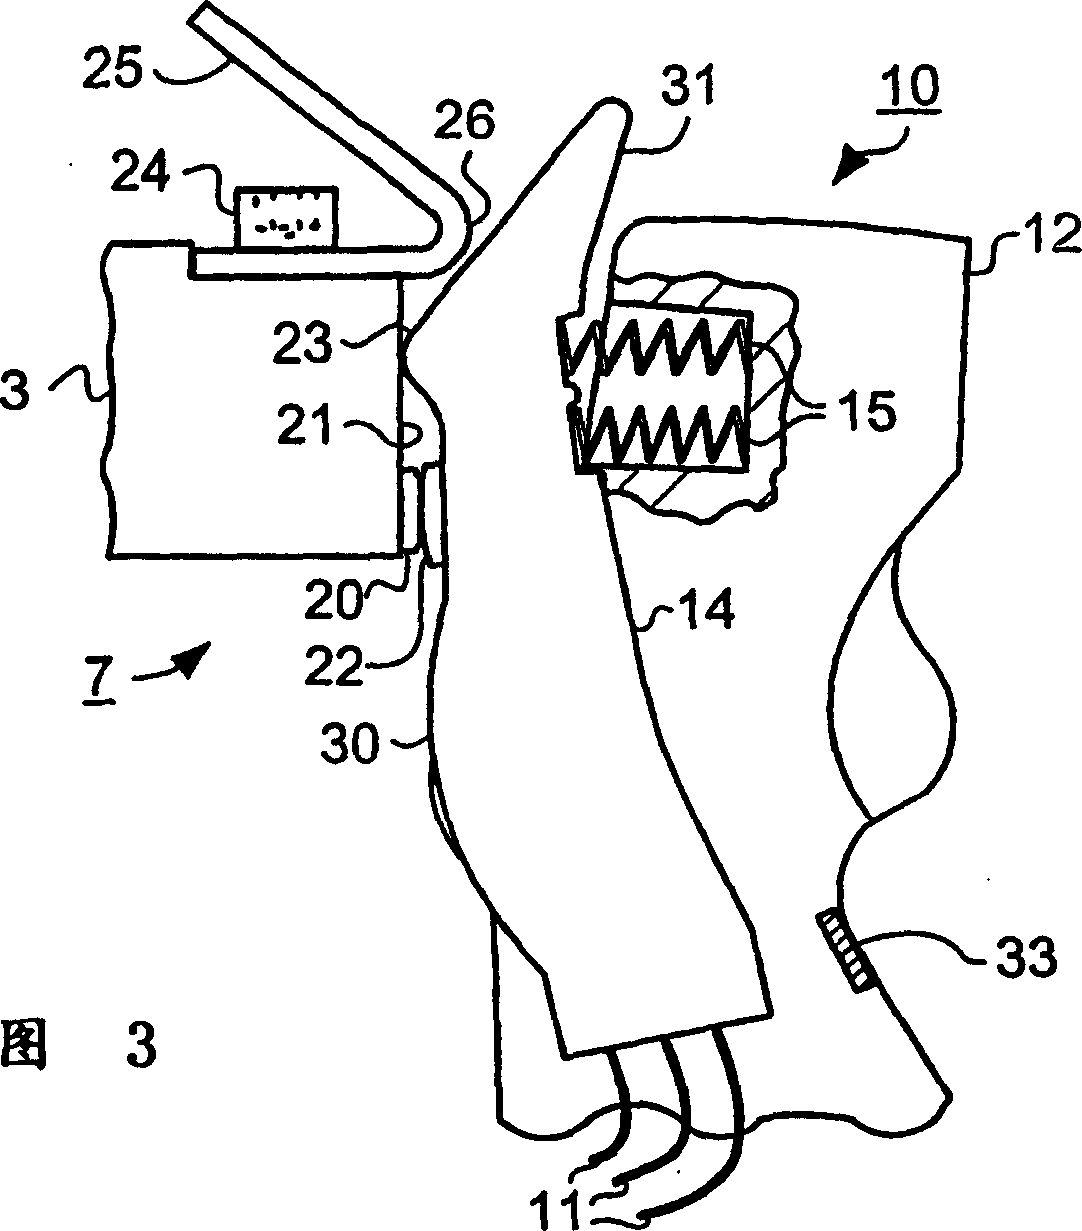 Switching contact arrangement of a low voltage circuit breaker